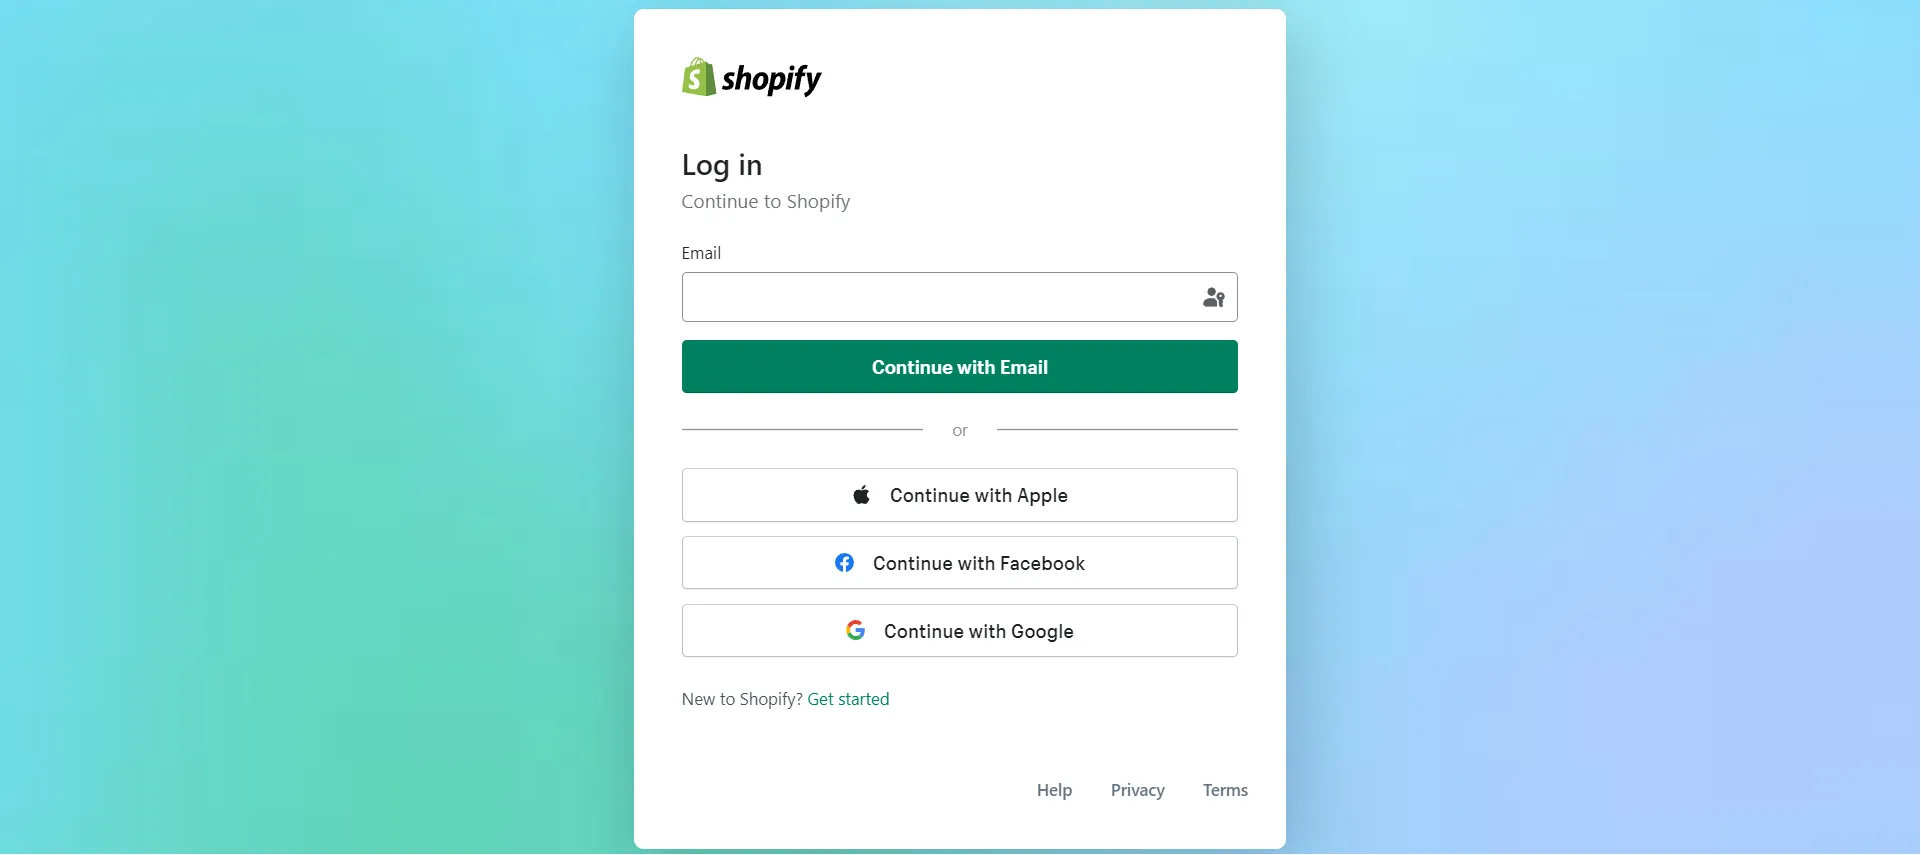 Log in to your Shopify account